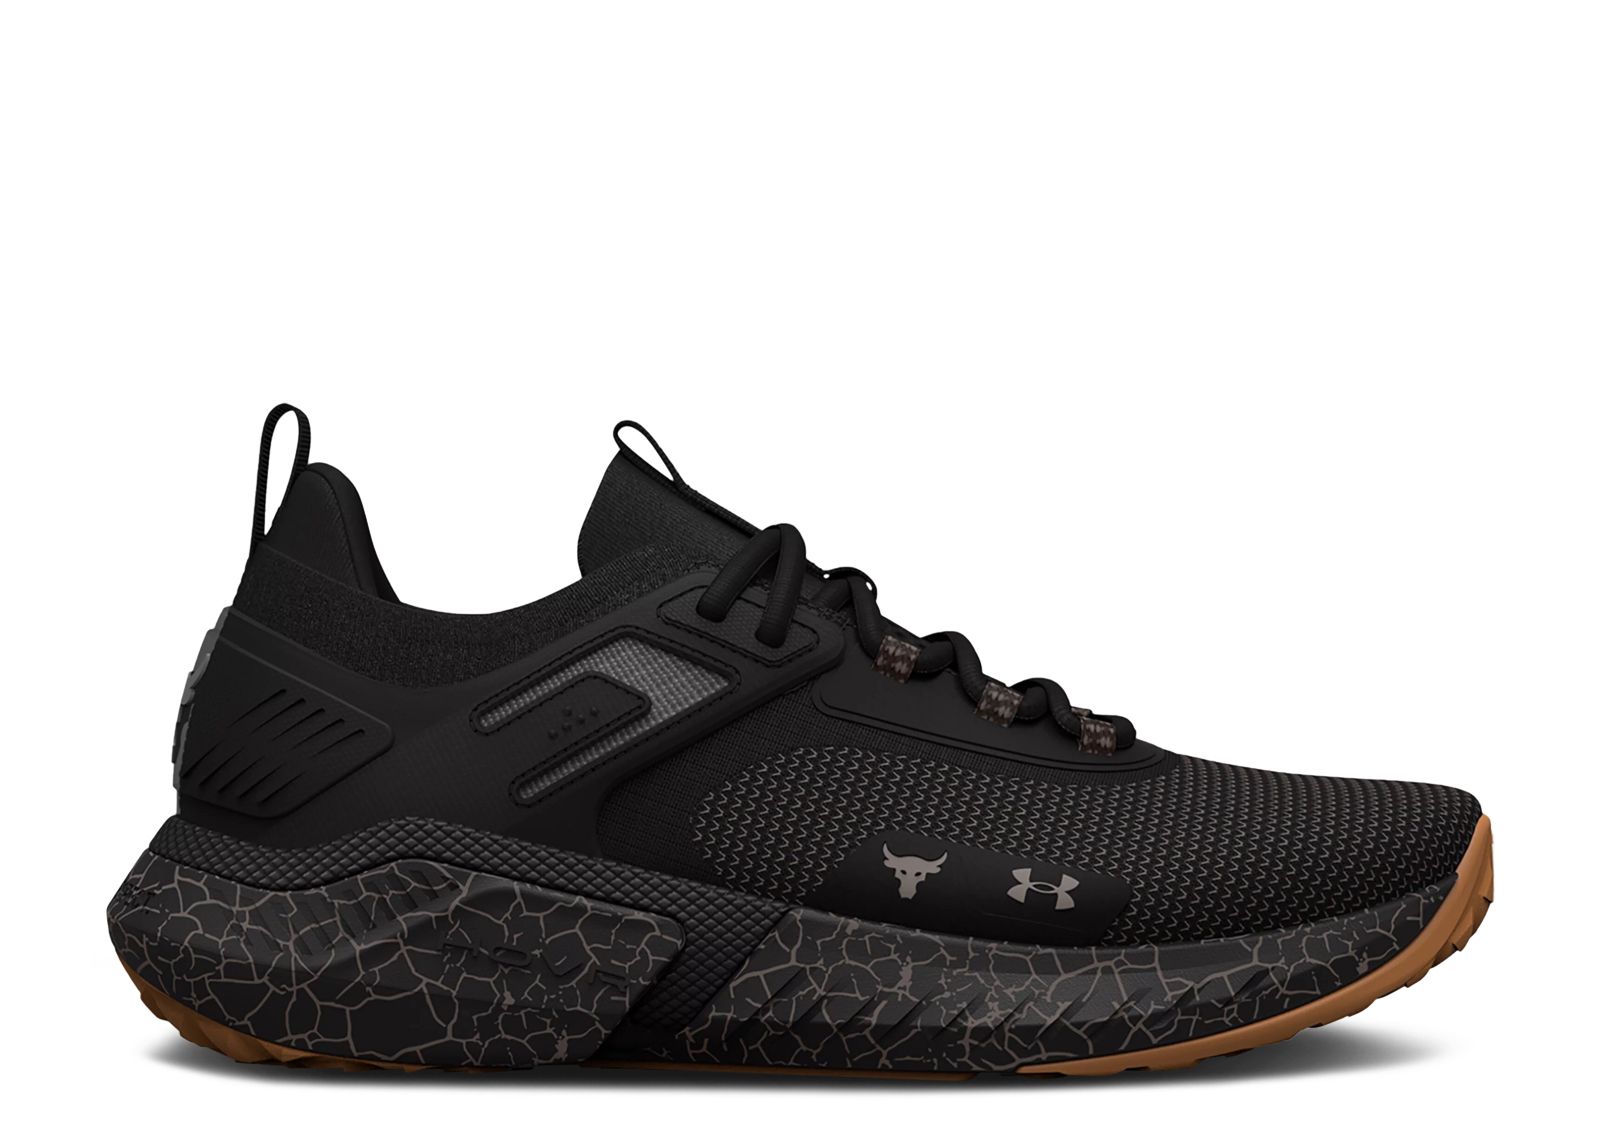 Project Rock 5 'Iron Paradise' - Under Armour - 3026074 001 - black/pewter